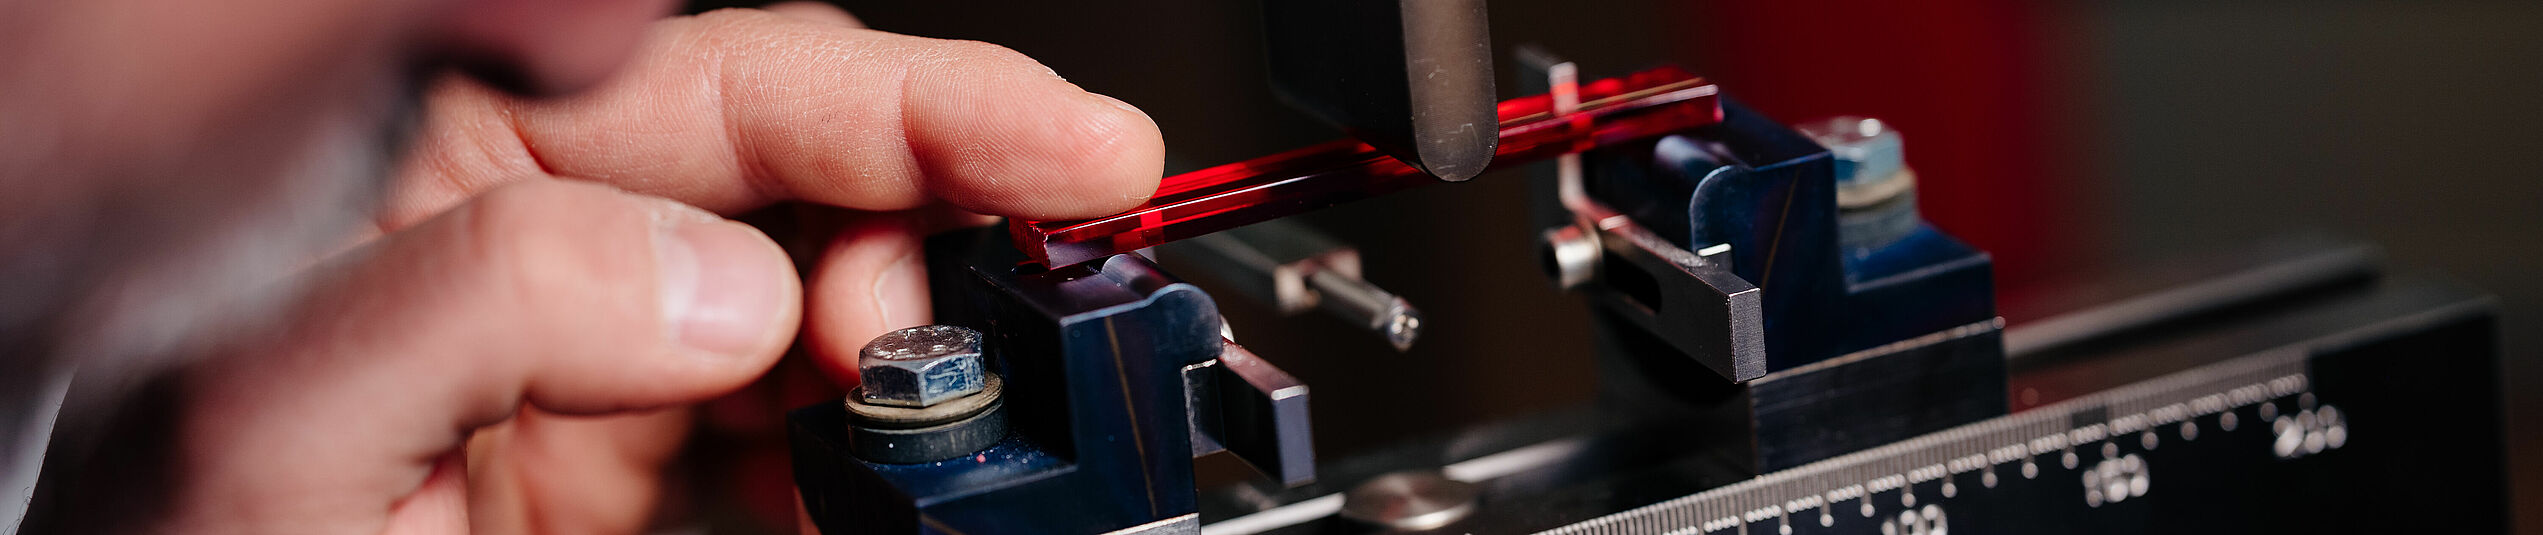 A scientist prepares to measure the deflection strength of a red colored transparent plastic strip in an apparatus